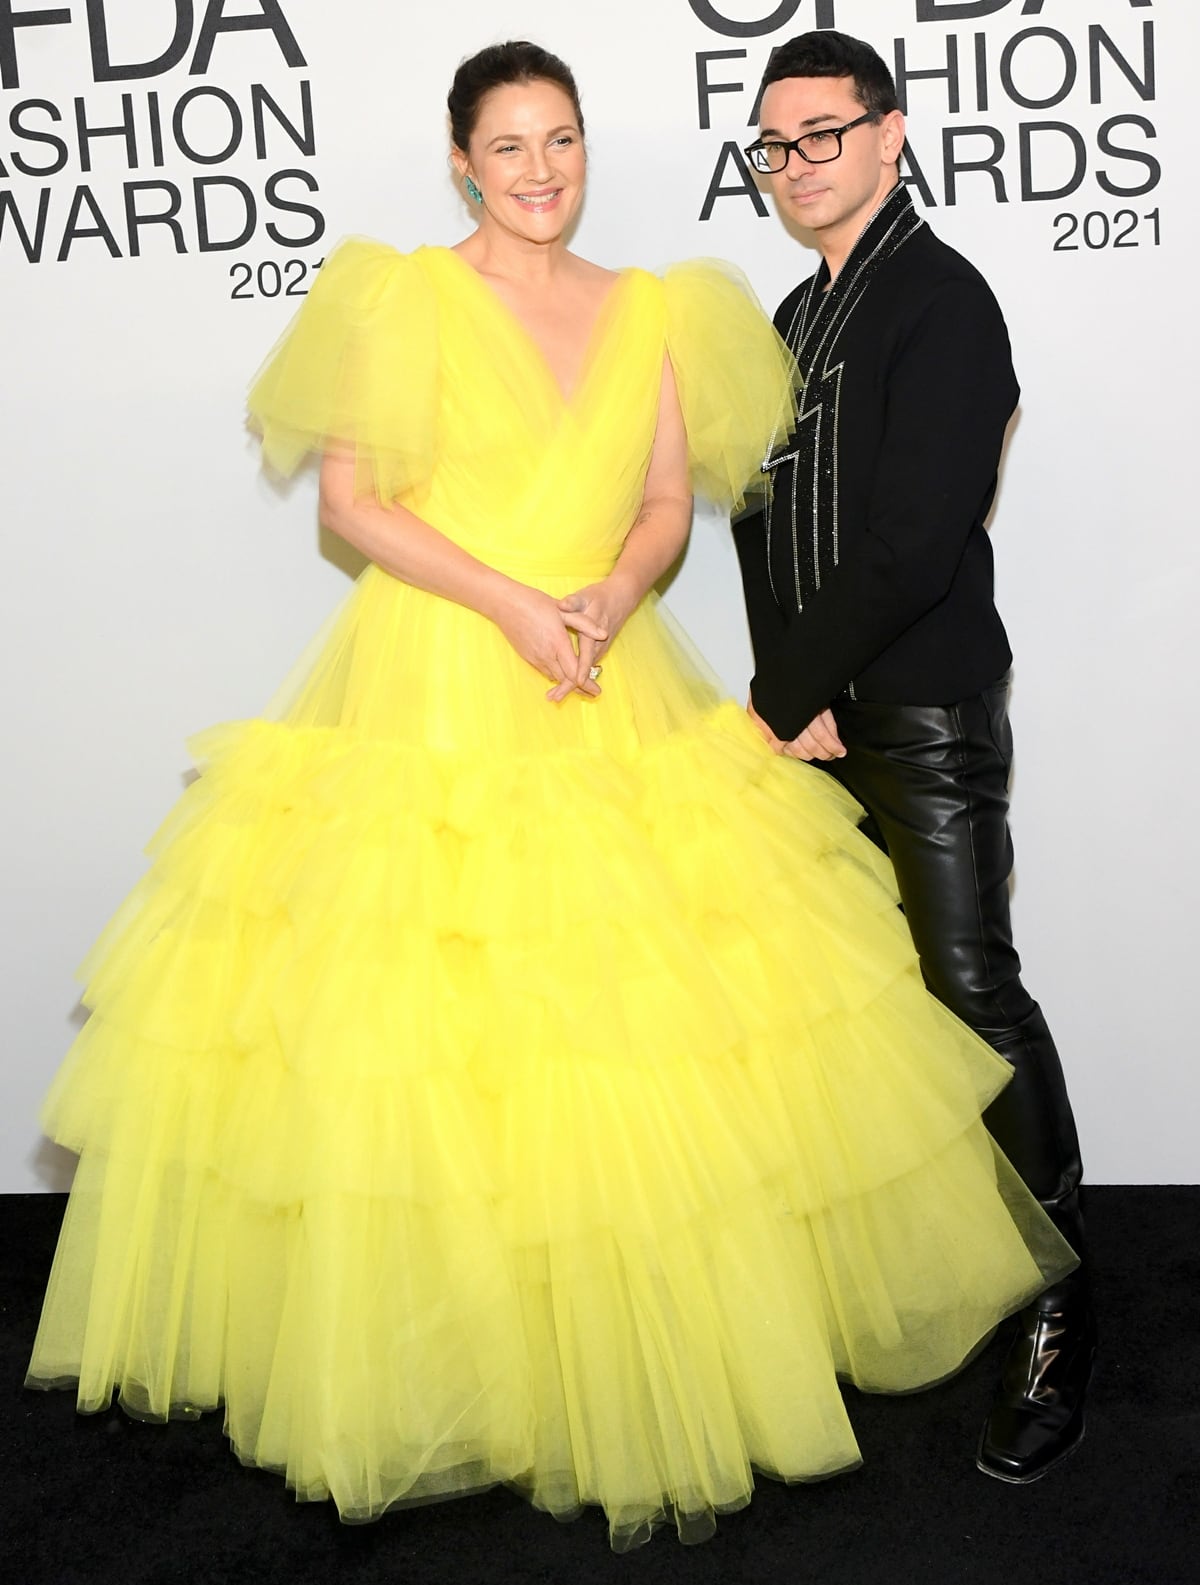 Drew Barrymore and the designer of her canary yellow tulle gown, Christian Siriano, at the 2021 CFDA Fashion Awards